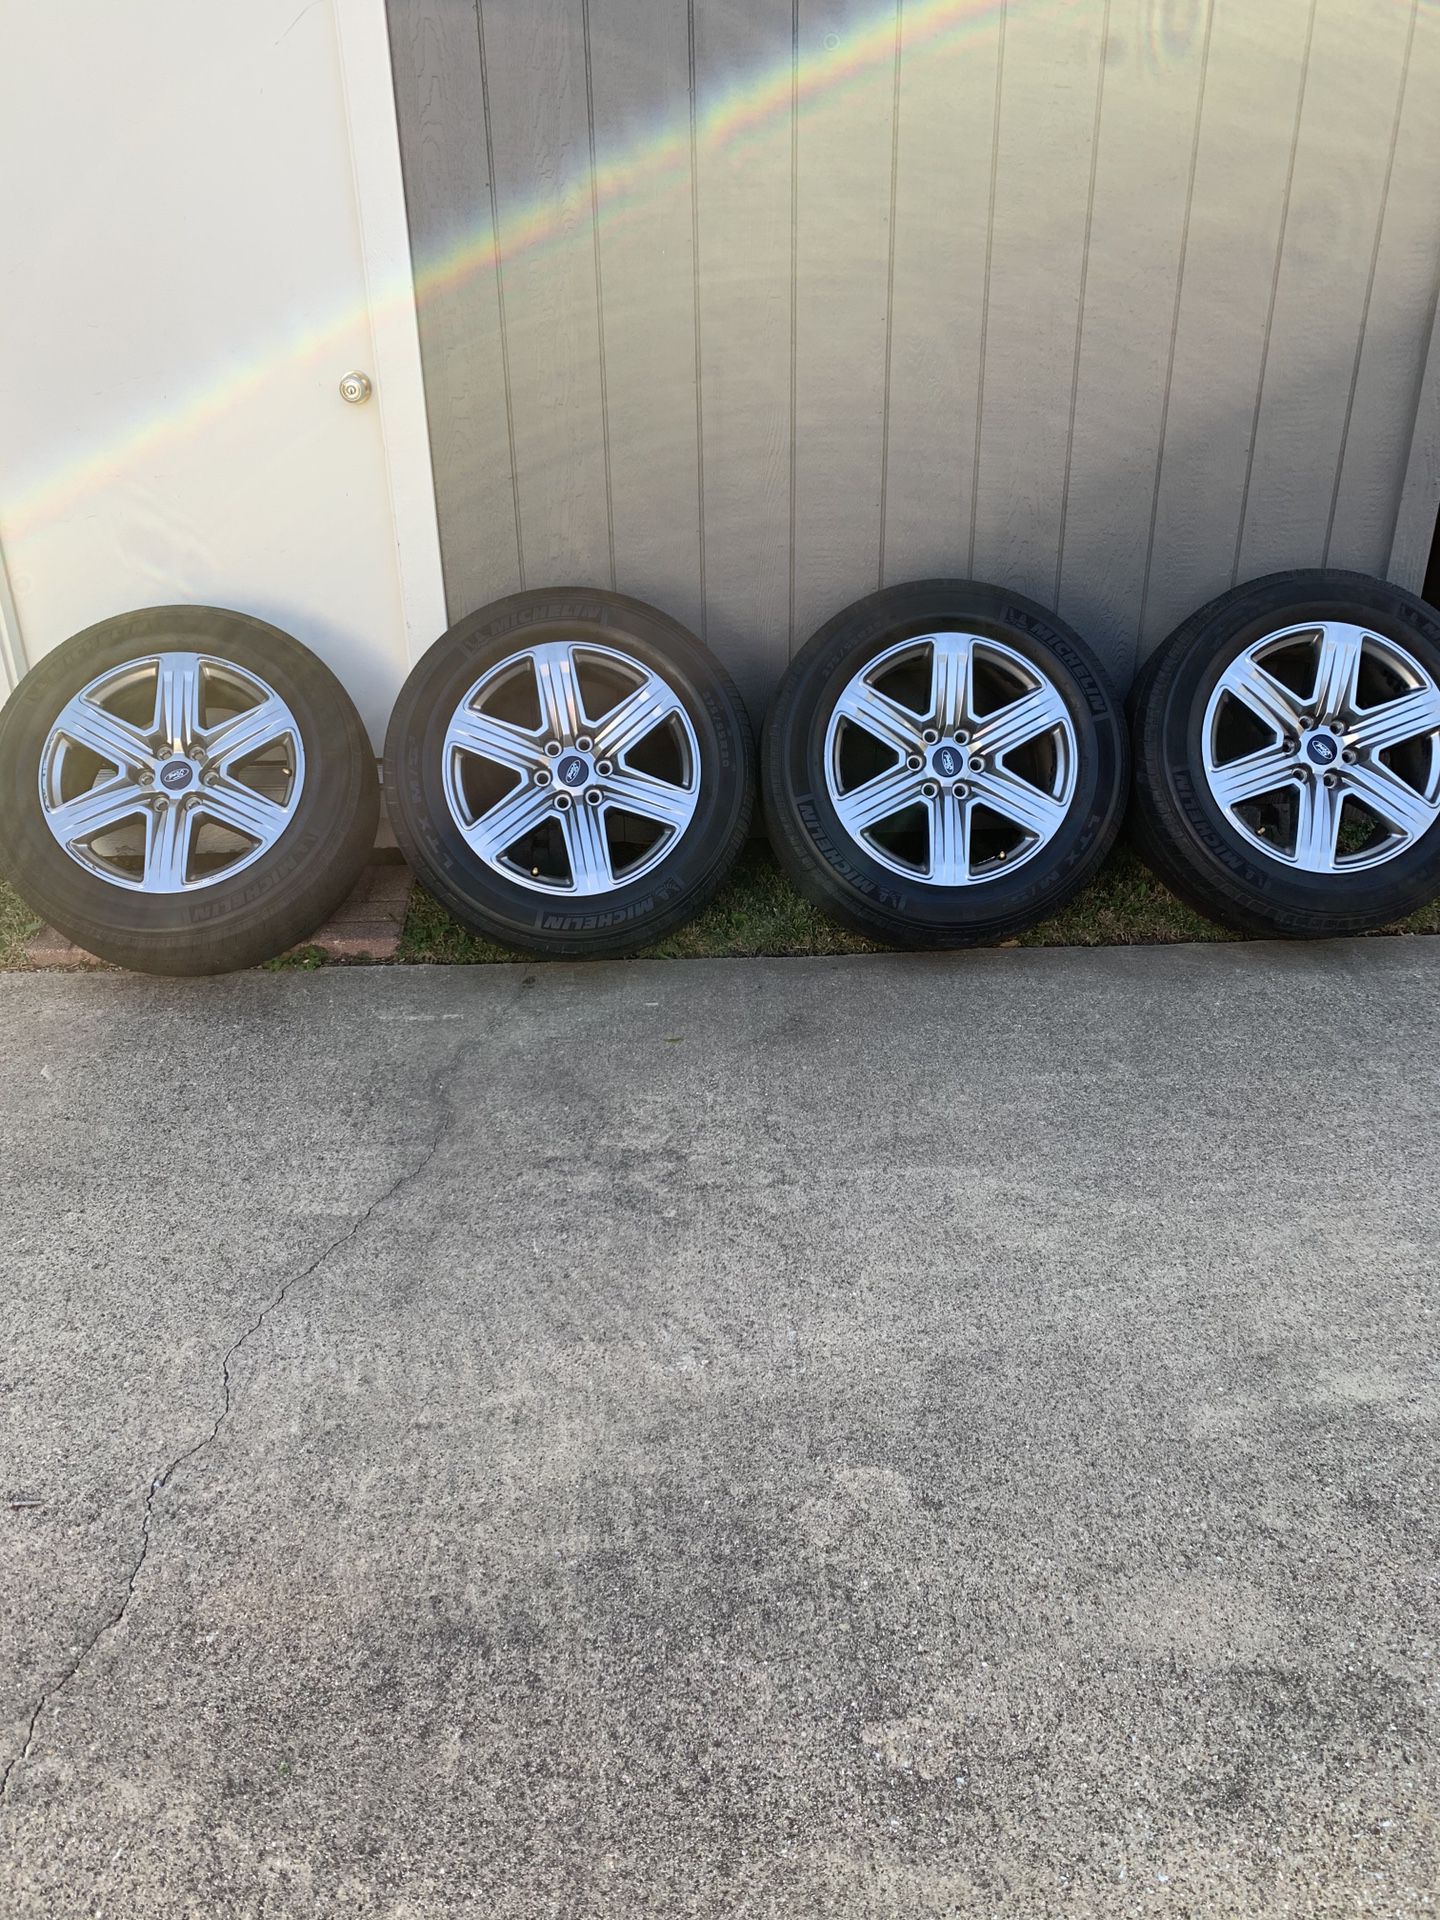 Ford F-150 Stock rims and tires. Mitchelin tire brand.